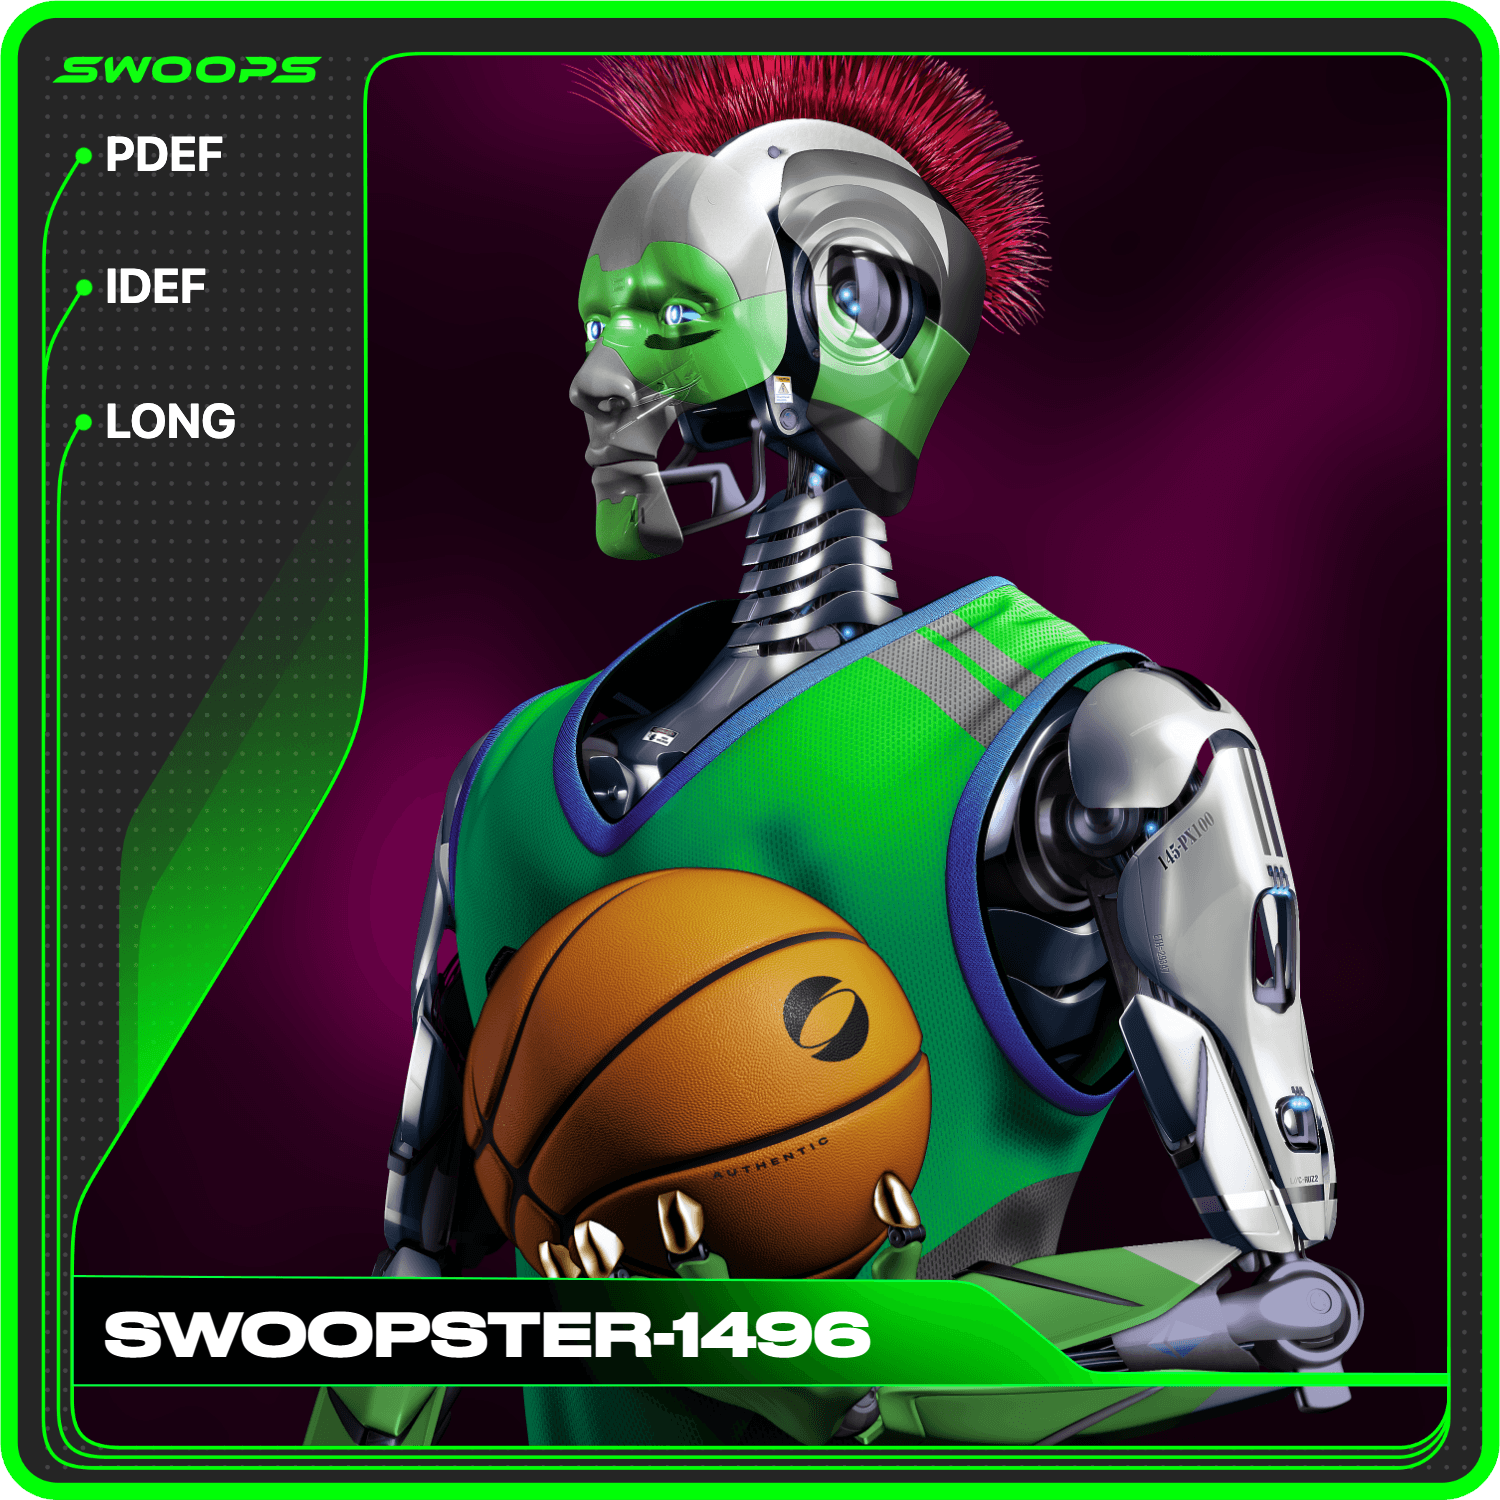 SWOOPSTER-1496